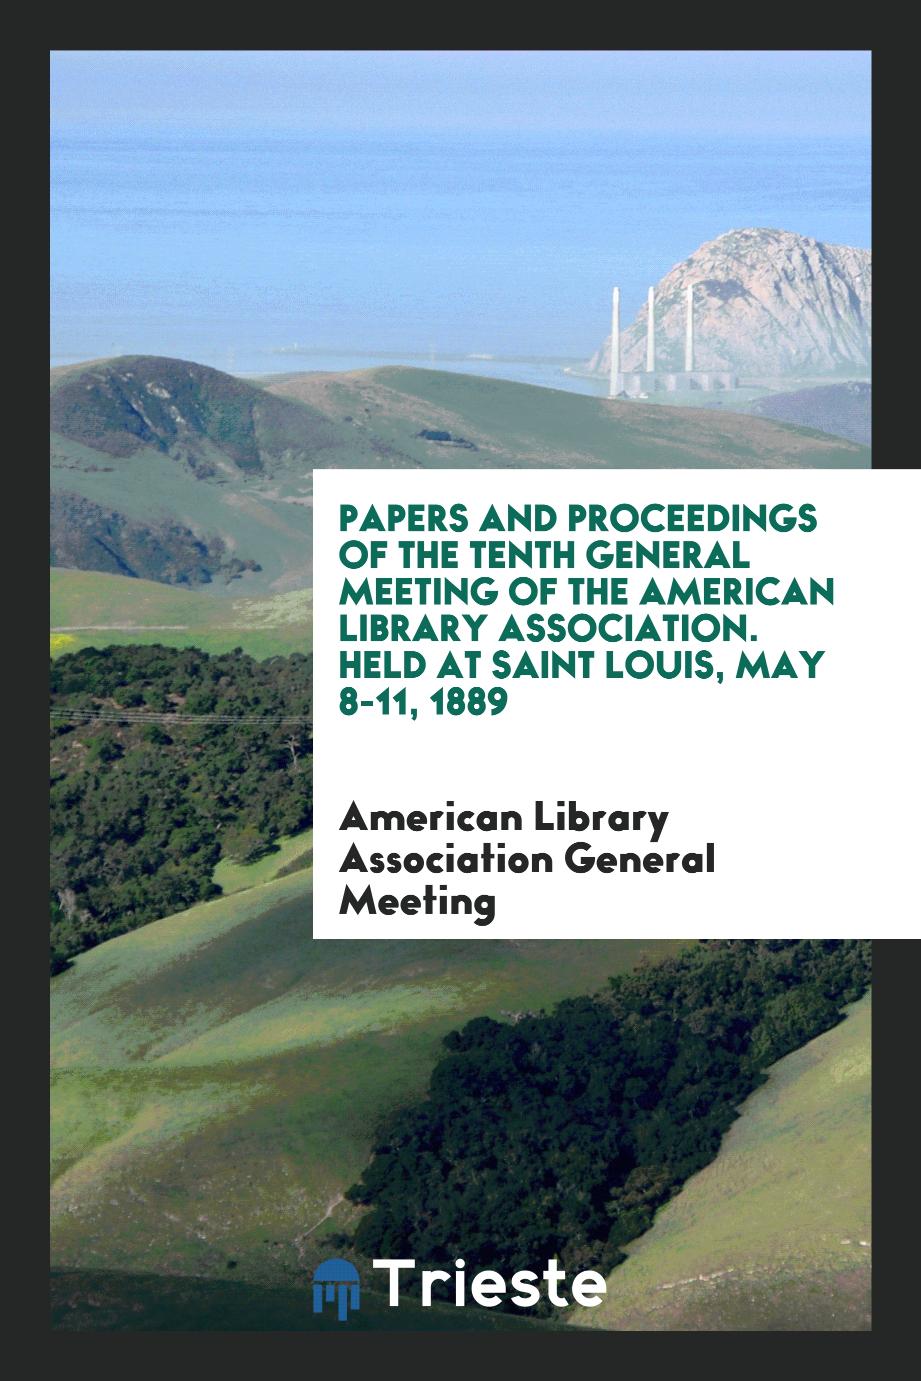 Papers and Proceedings of the Tenth General Meeting of the American Library Association. Held at Saint Louis, May 8-11, 1889